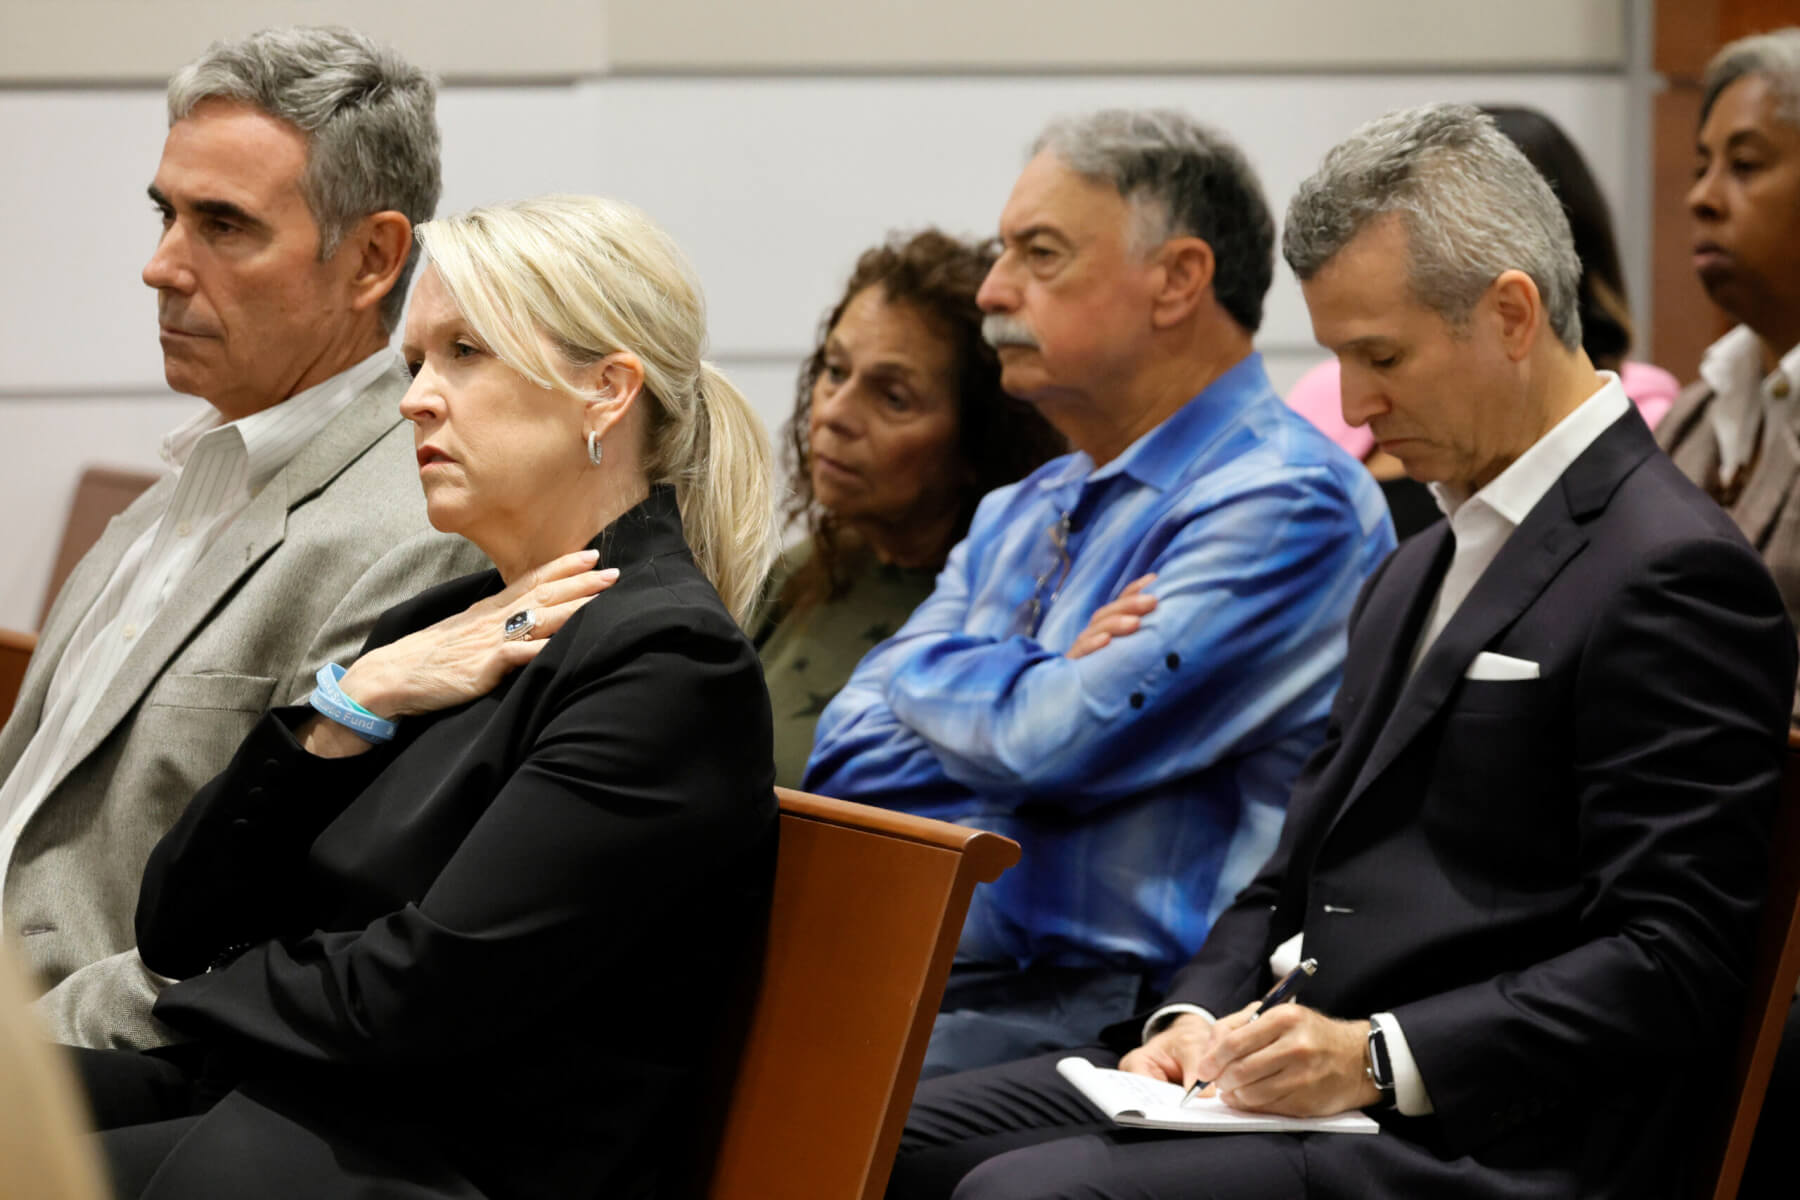 Gena and Tom Hoyer, left, and Max Schachter, right, listen during closing arguments.